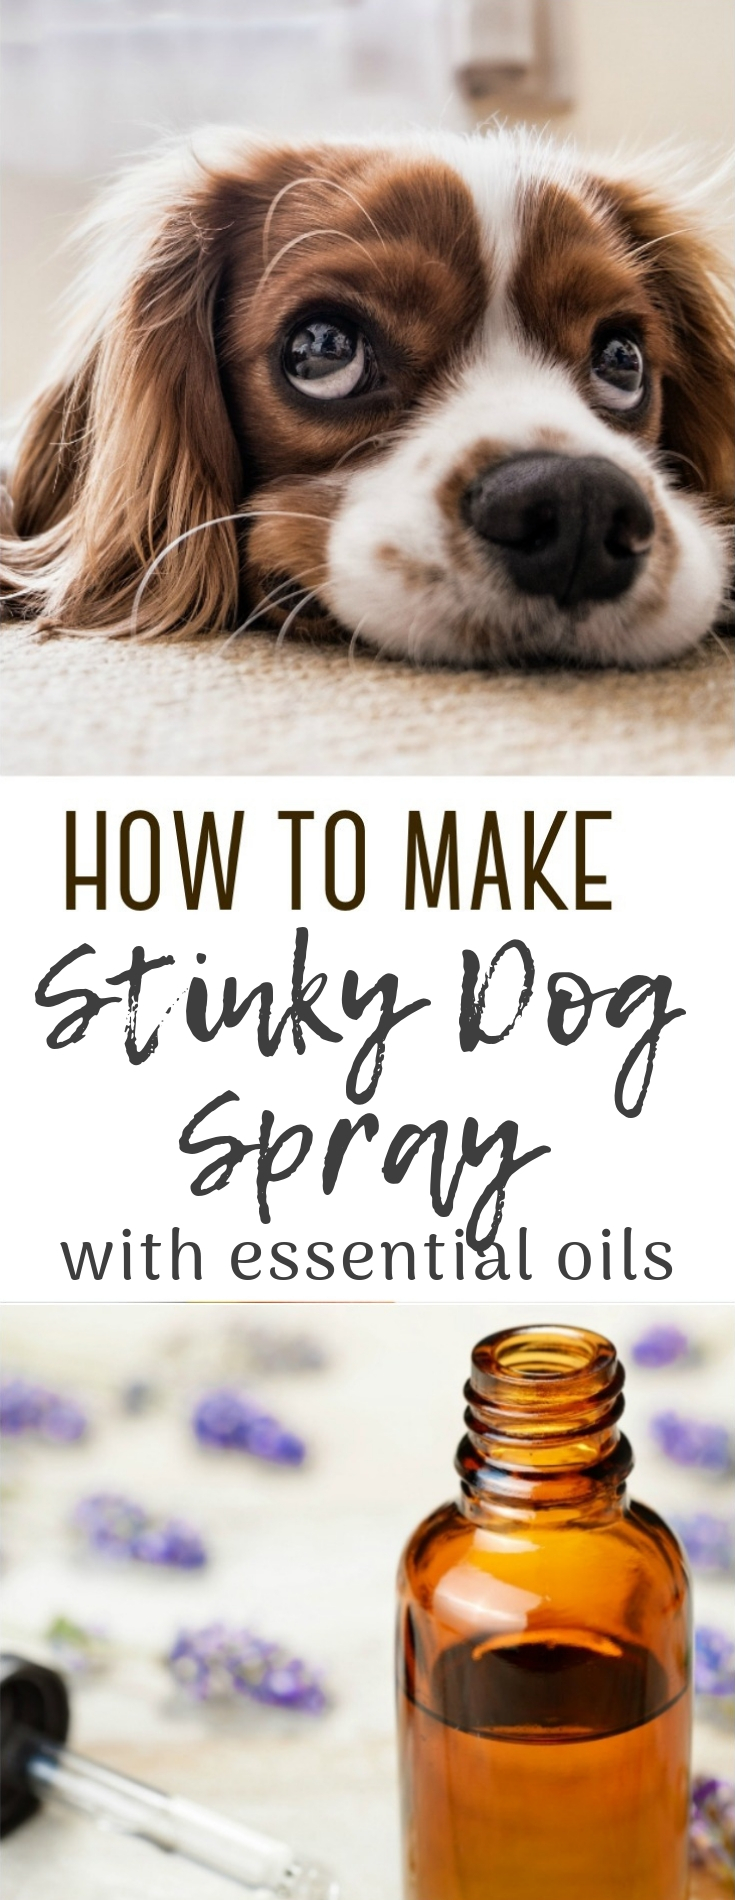 Our four legged friends are amazing - but every so often, they can struggle with pet odor. Whip up this simple stinky dog spray for your furry friend!